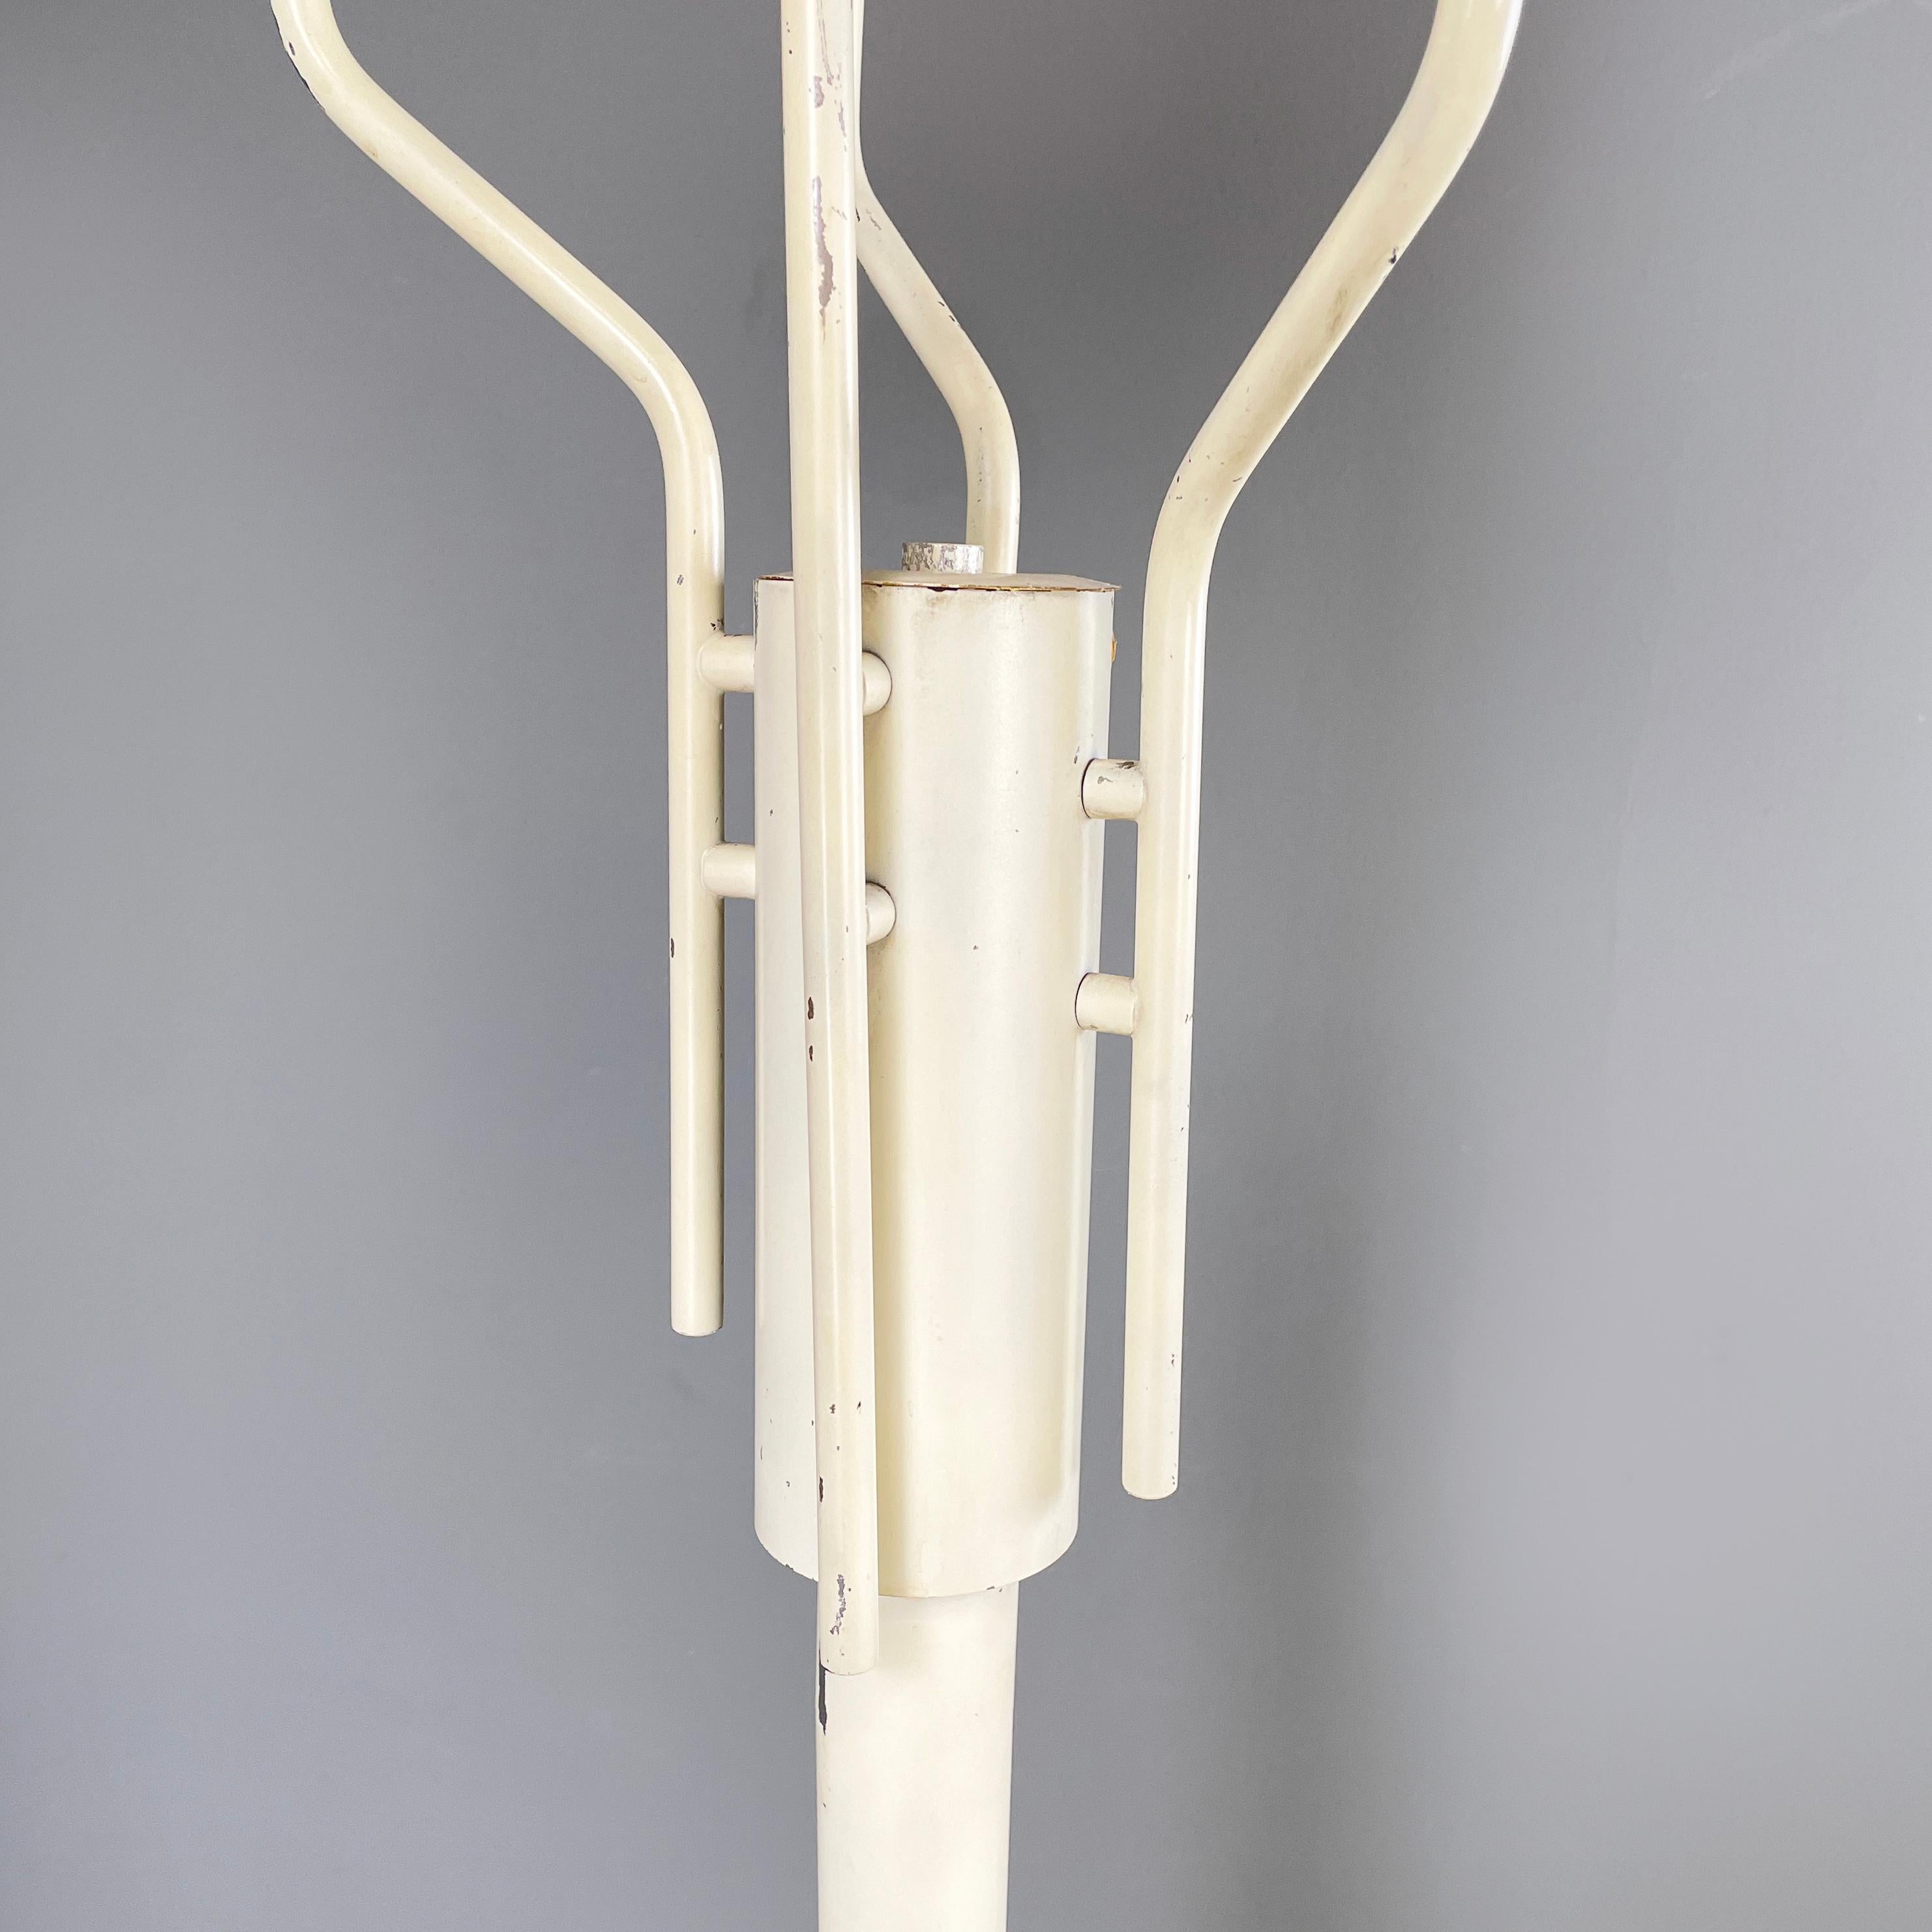 Italian modern floor lamp in opaline glass and white metal, 1980s For Sale 8